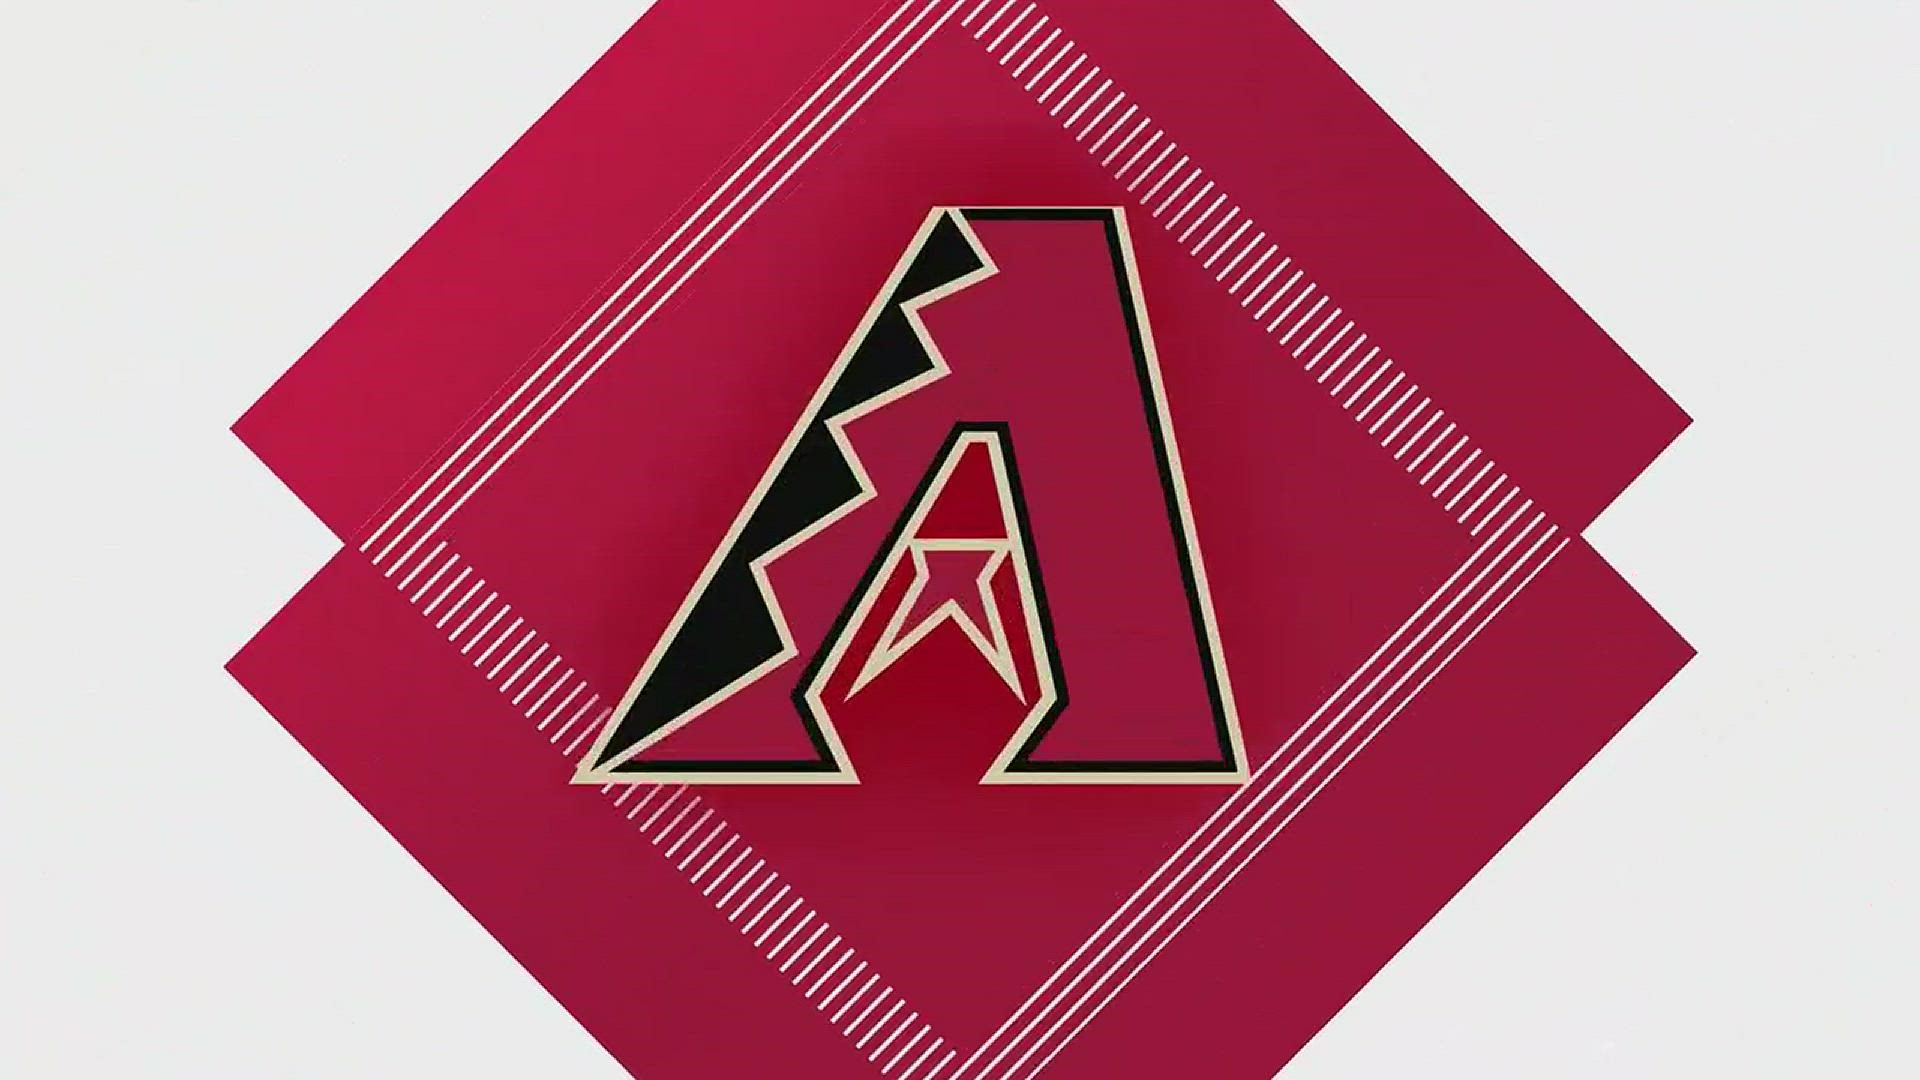 Go to Dbacks.com/12News to get tickets for the Diamondbacks games on Friday and Sunday as they take on the Miami Marlins.